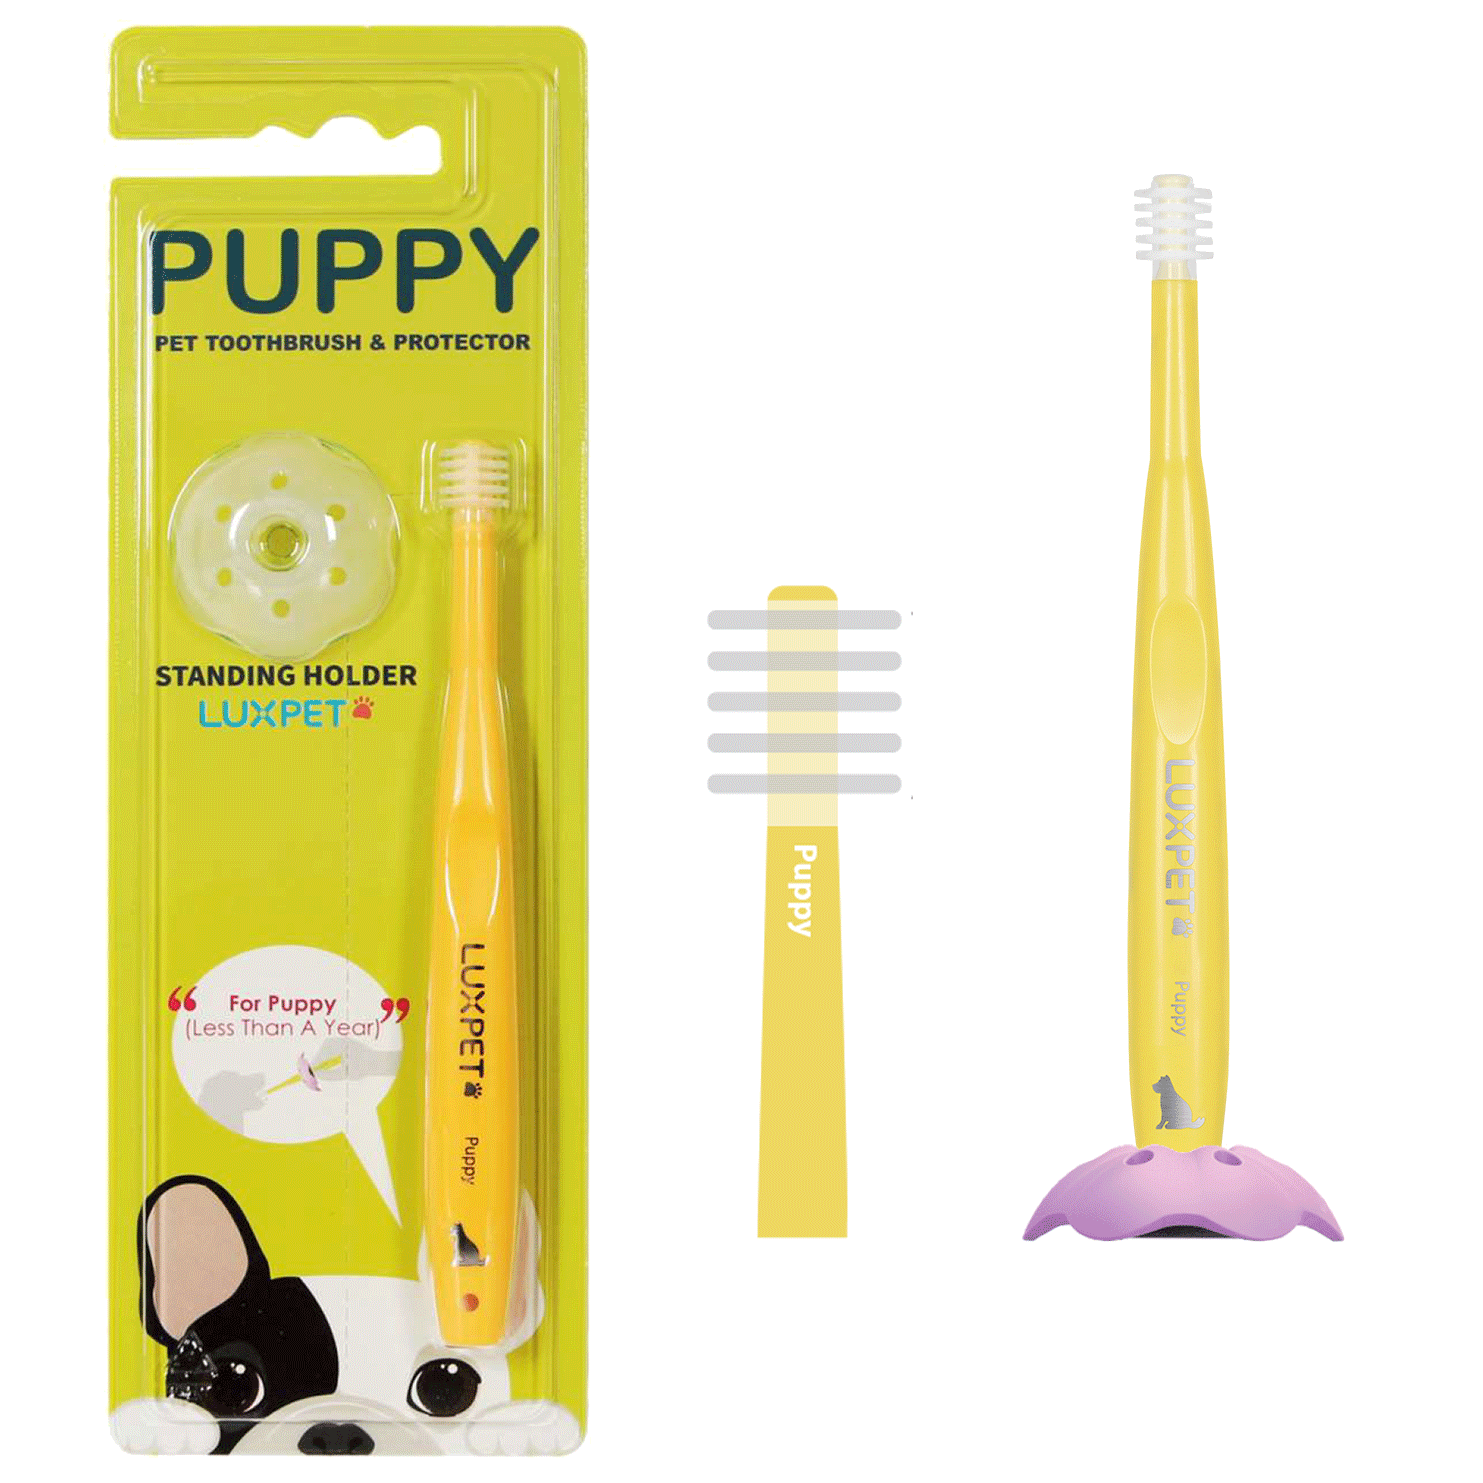 LUXPET with silicon protector for puppy